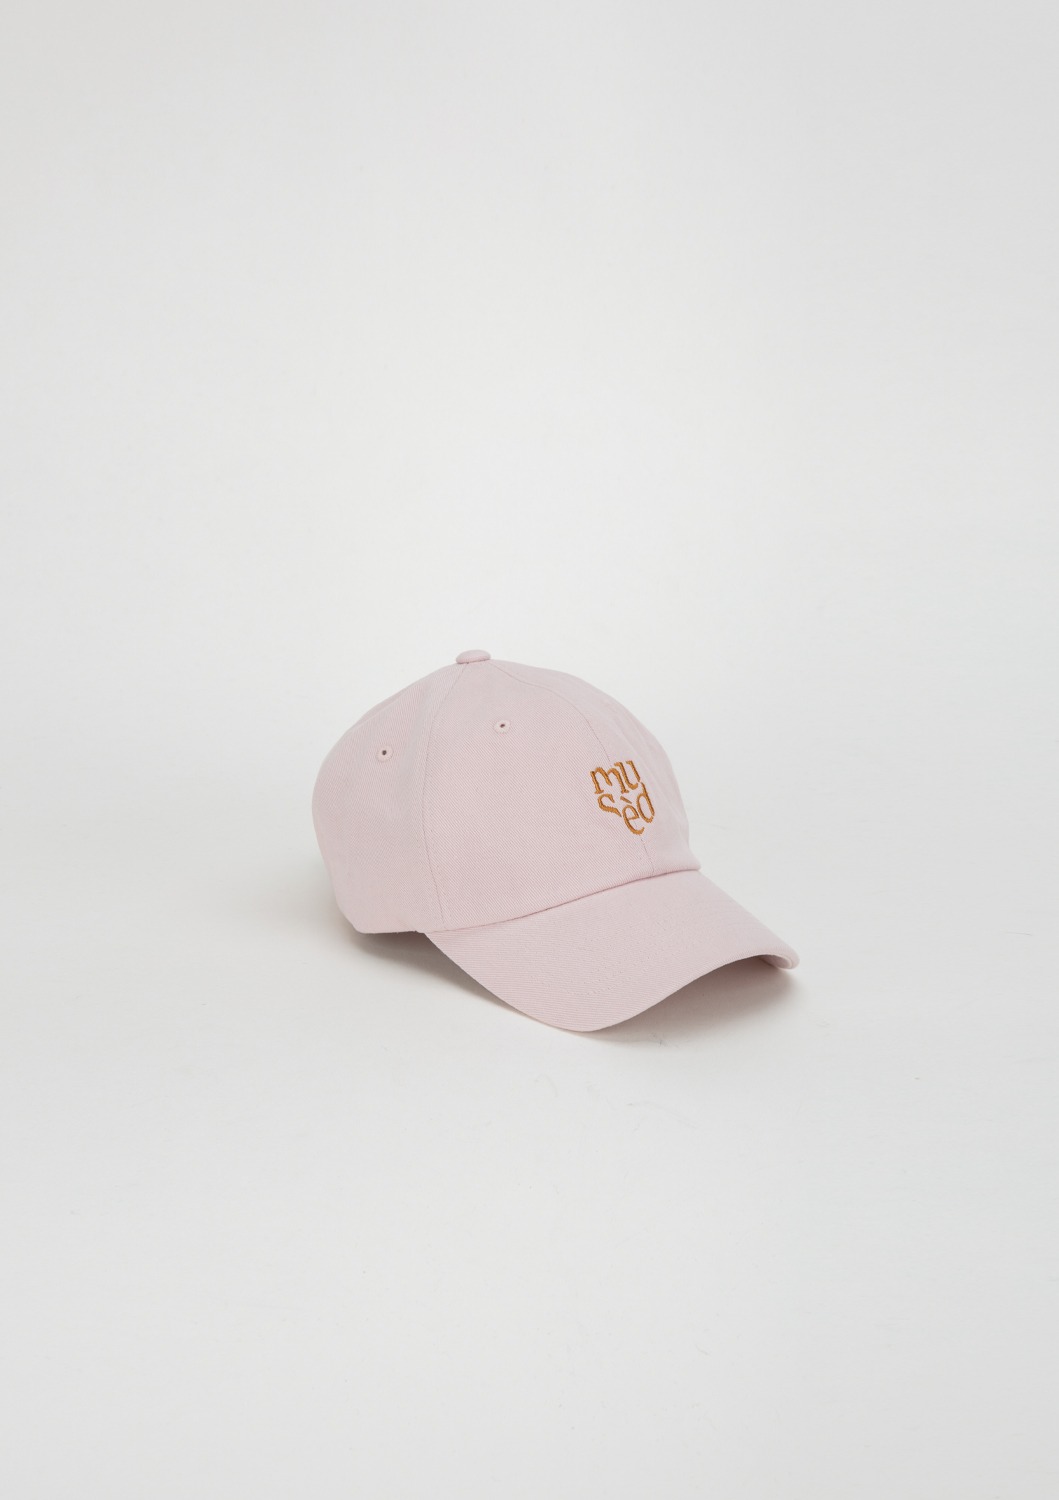 Mused Logo Ball Cap - Dusty Pink